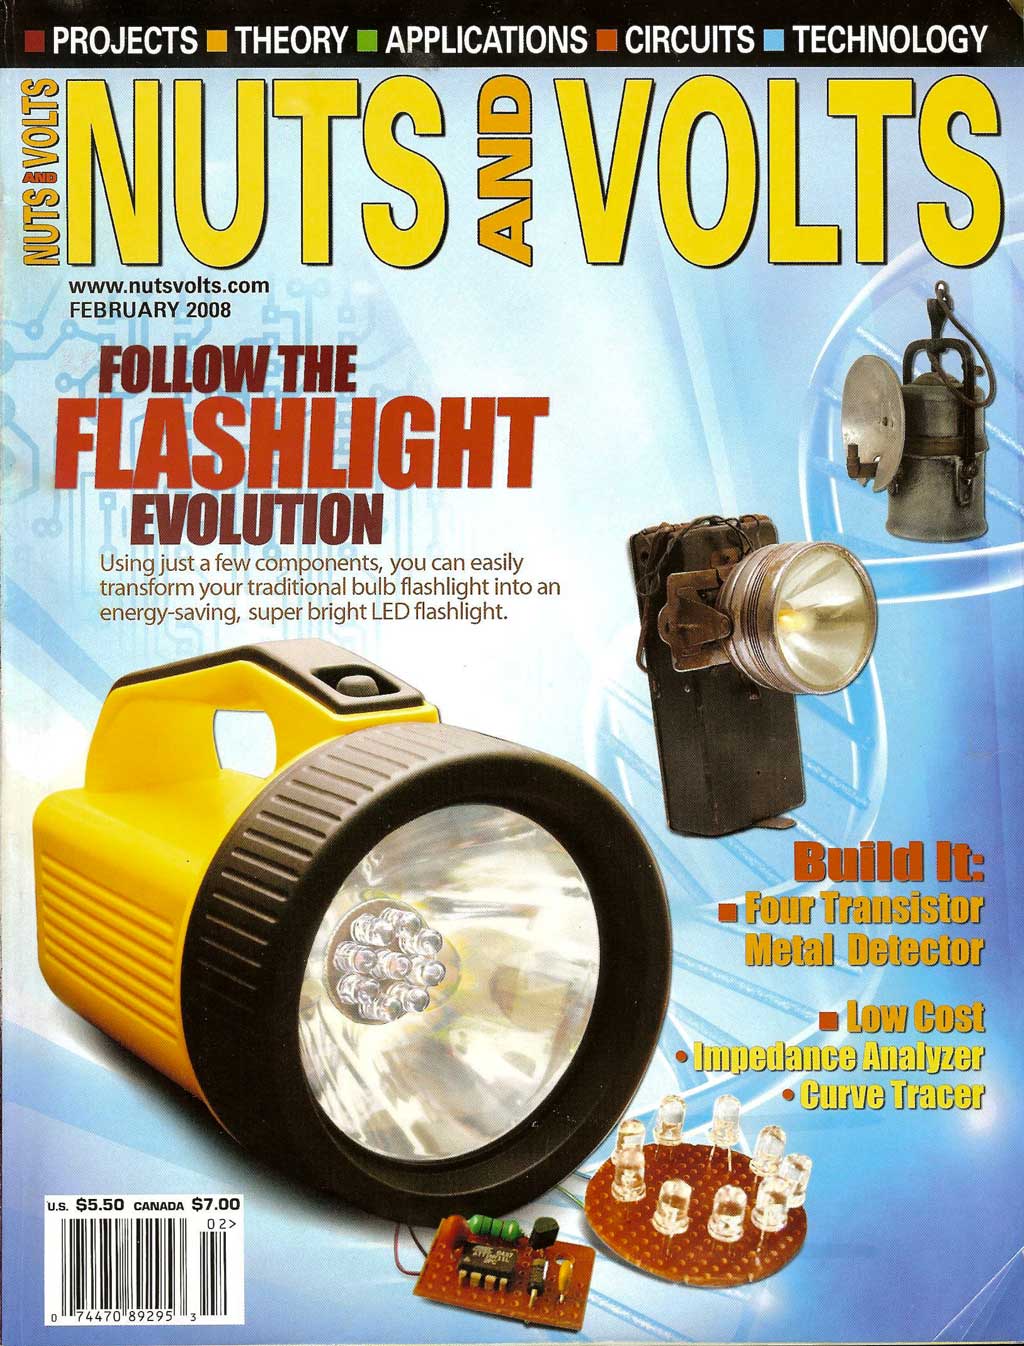 scanned front cover from Nuts & Volts, Feb 2008